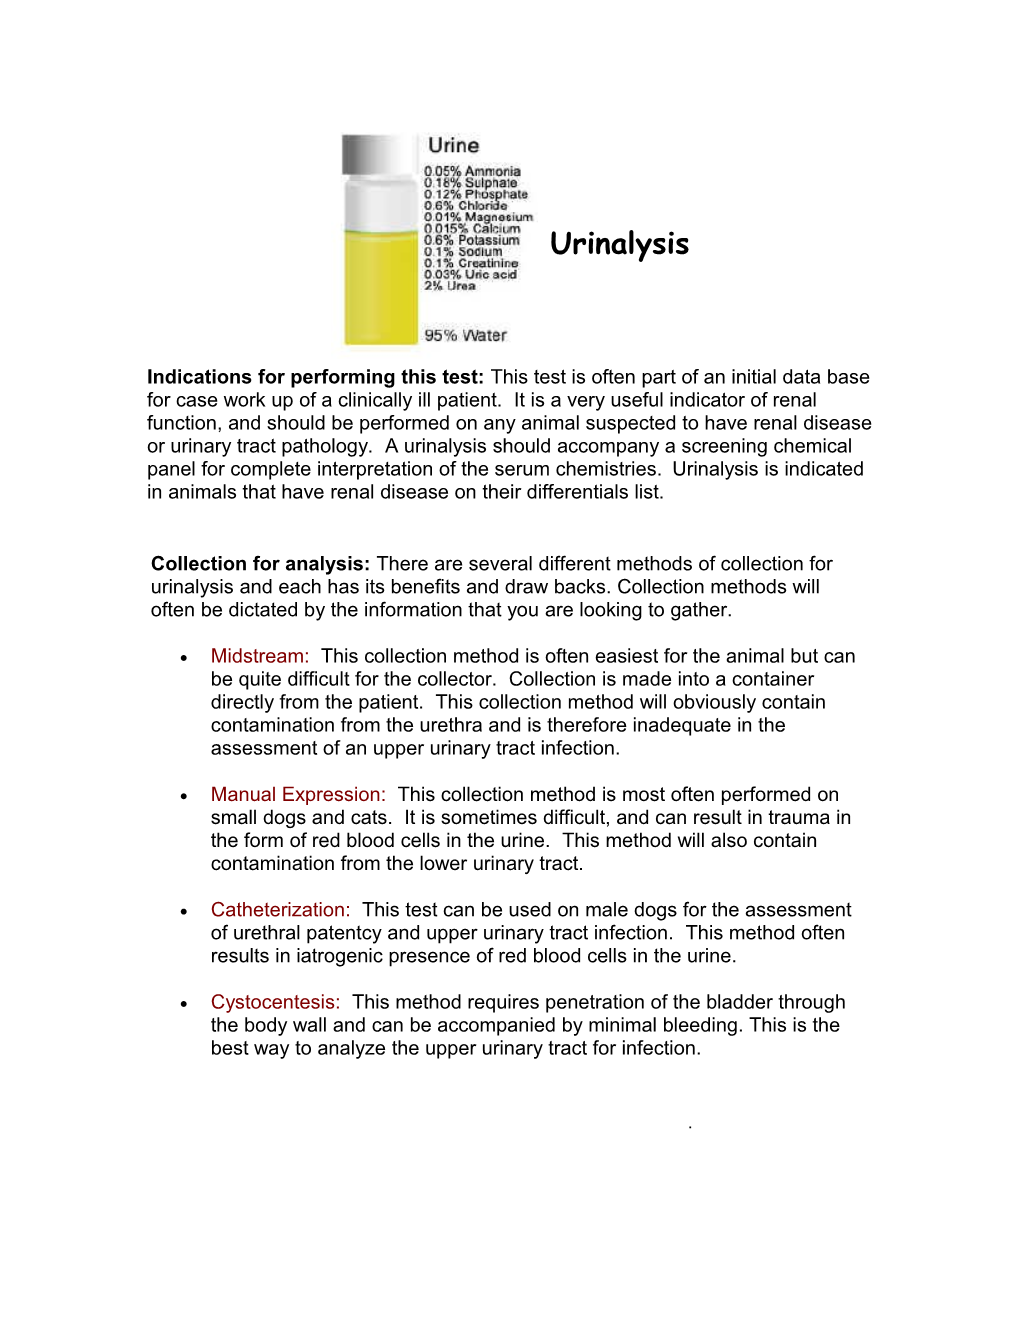 Collection for Analysis: There Are Several Different Methods of Collection for Urinalysis